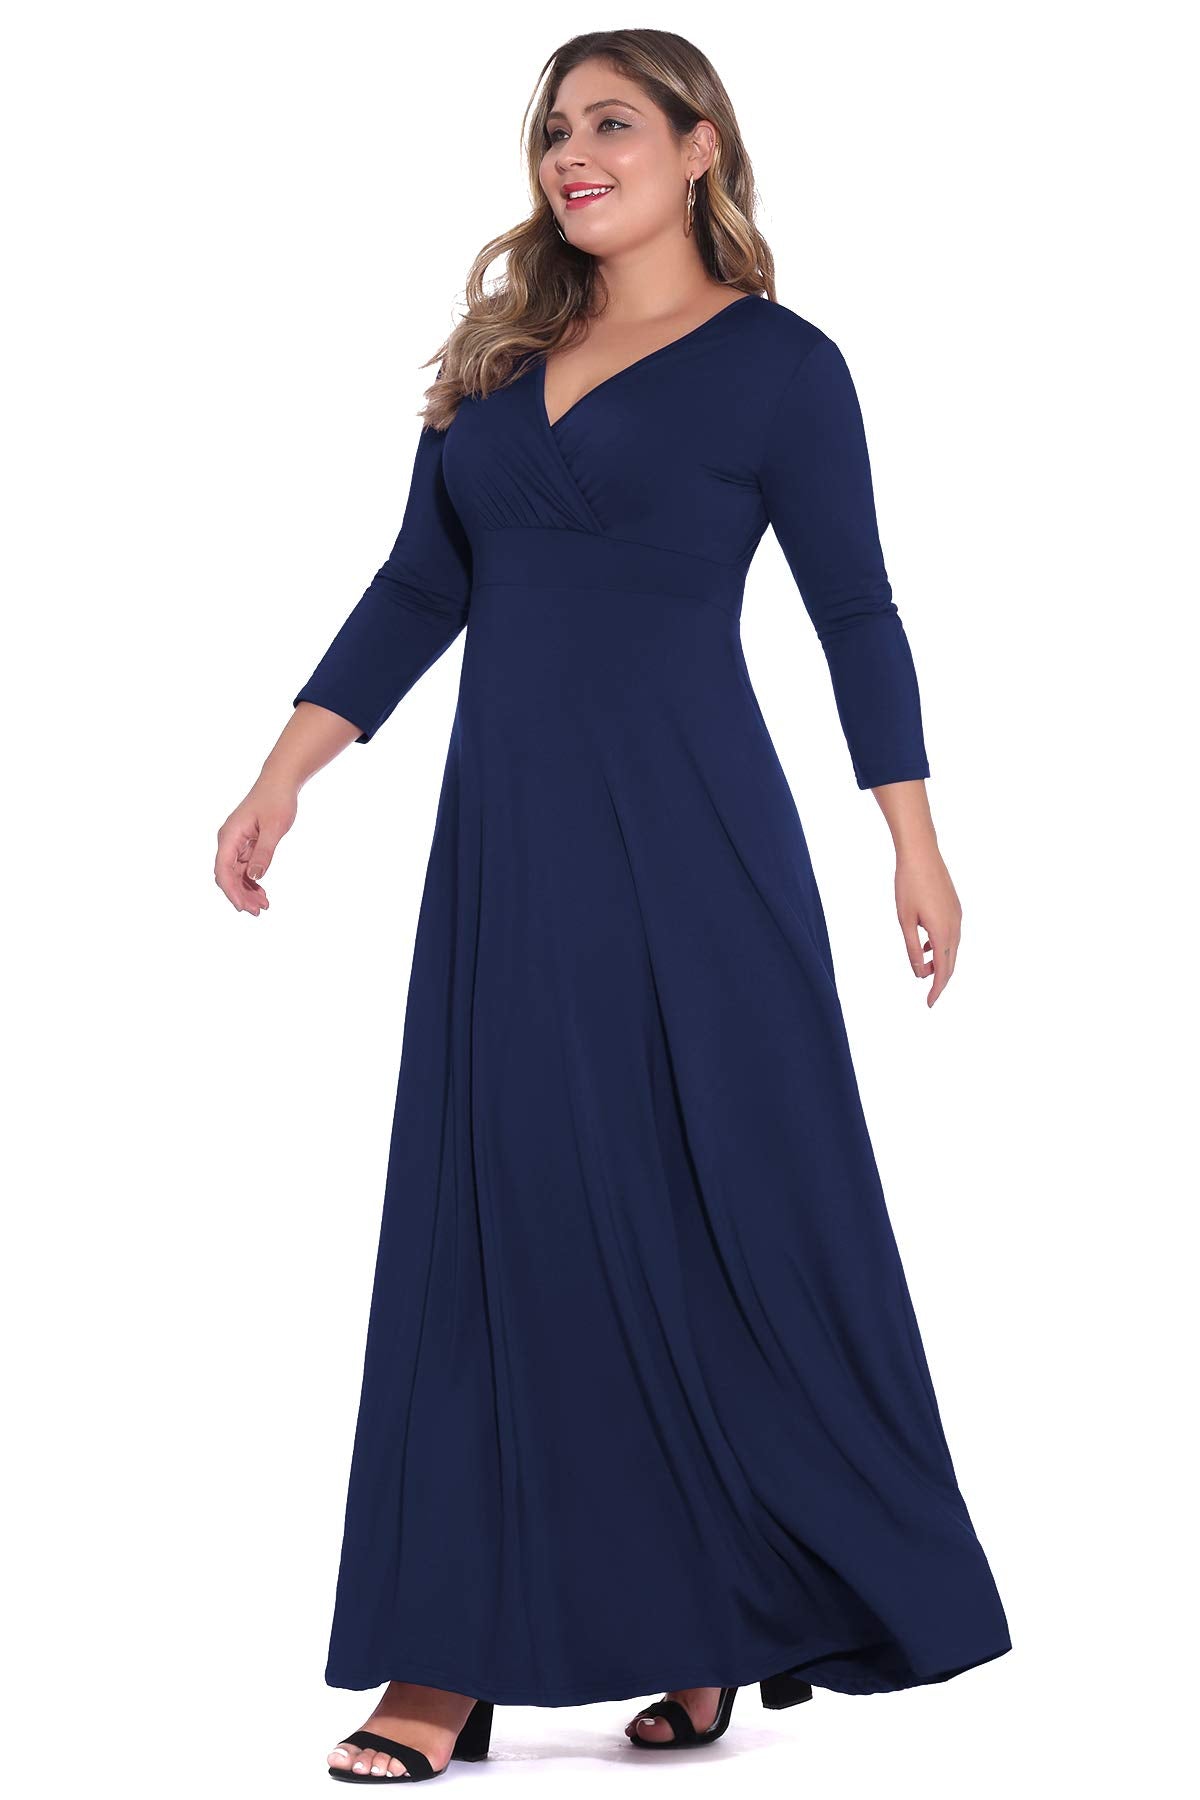 Women's Solid V-Neck 3/4 Sleeve Gowns - POSESHE